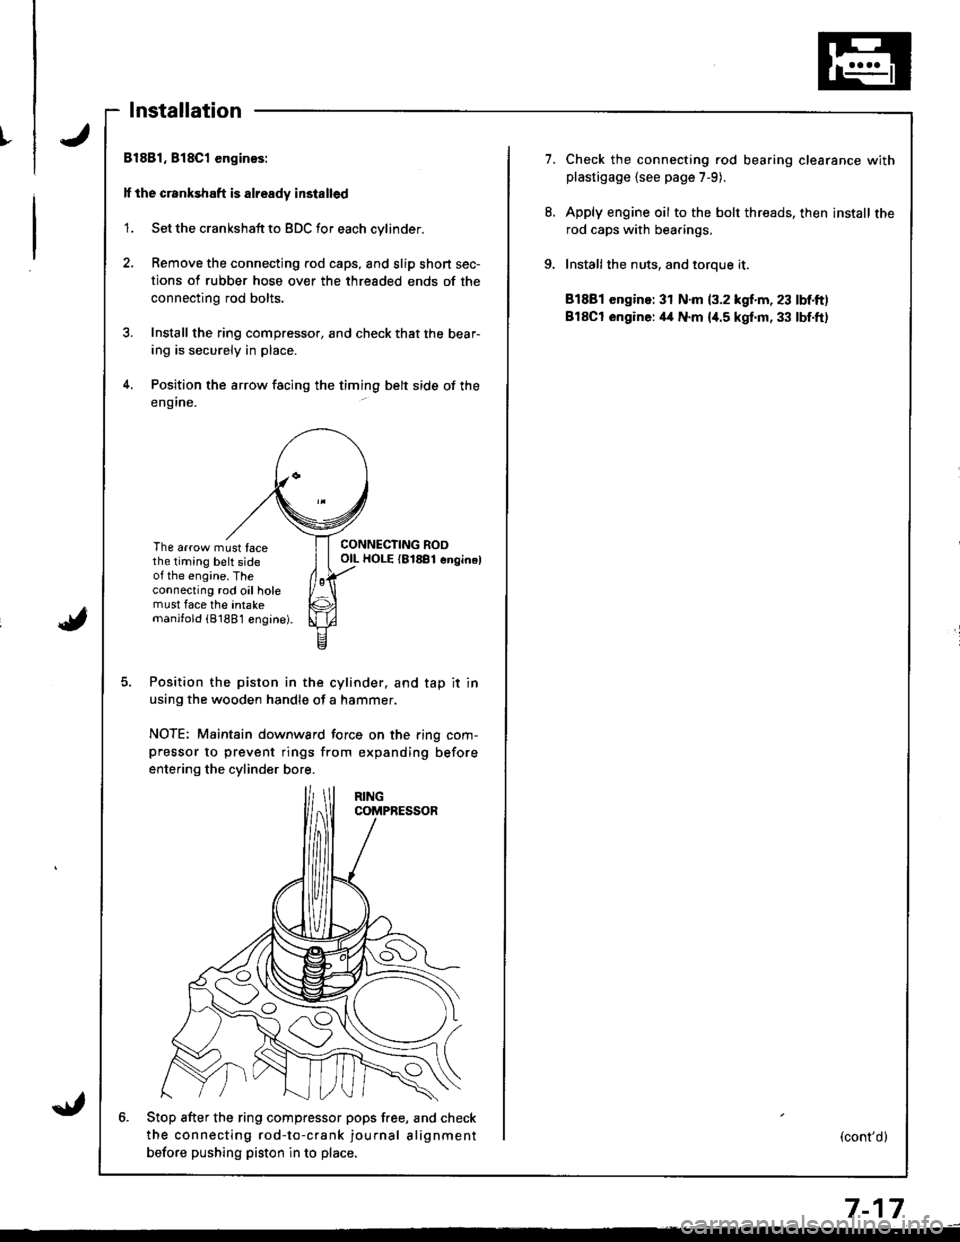 HONDA INTEGRA 1998 4.G User Guide t
Installation
Bl881, 818C1 enginos:
lf the crankshaft is already installed
1. Set the crankshaft to BDC for each cylinder.
2, Remove the connecting rod caps, and slip short sec-
tions of rubber hose